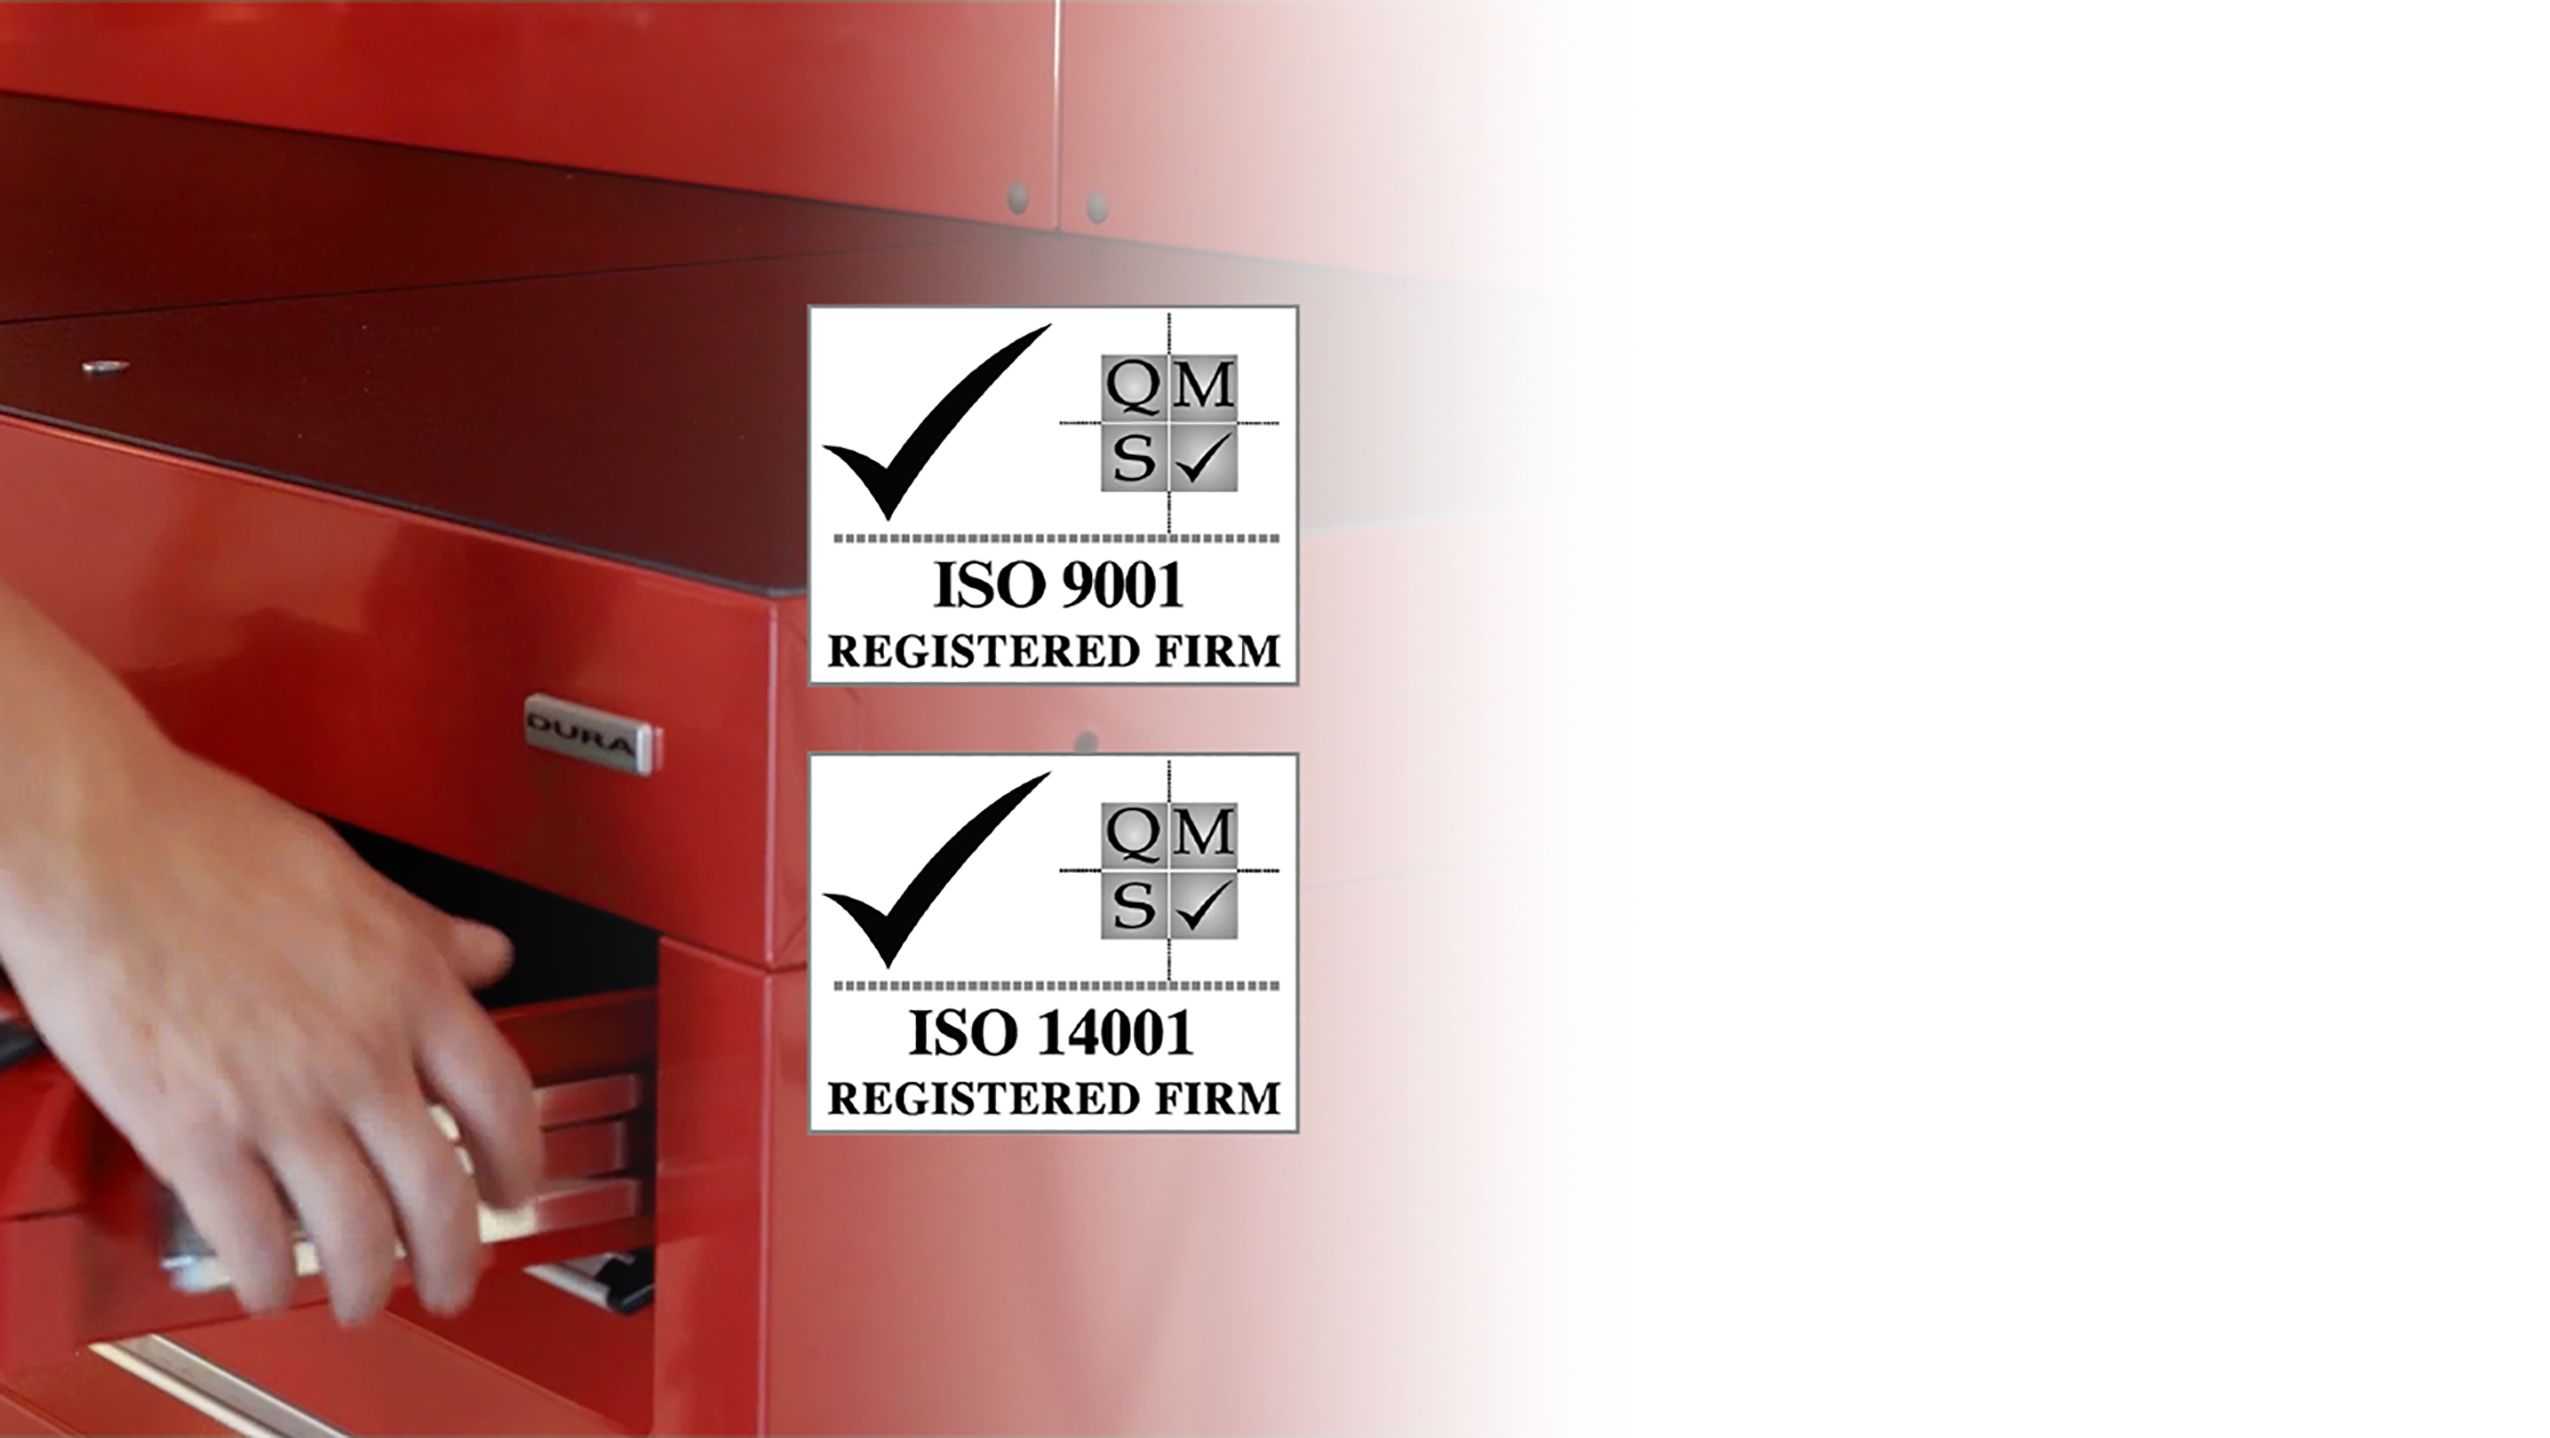 Drawer opening on red tool cabinets with ISO 9001/14001 logos